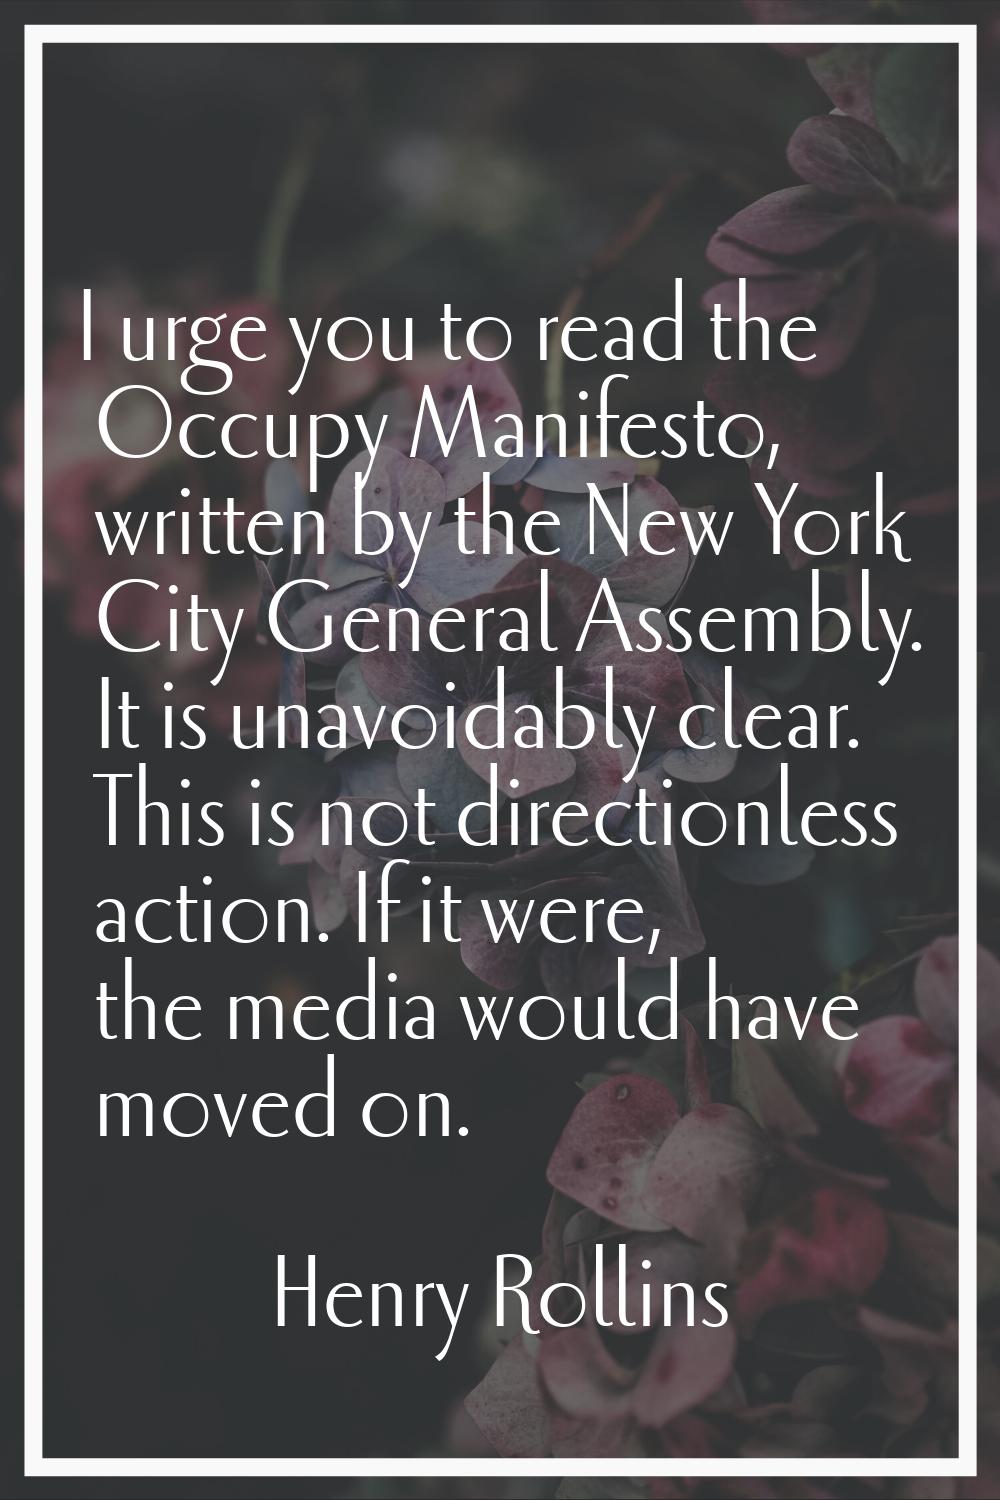 I urge you to read the Occupy Manifesto, written by the New York City General Assembly. It is unavo